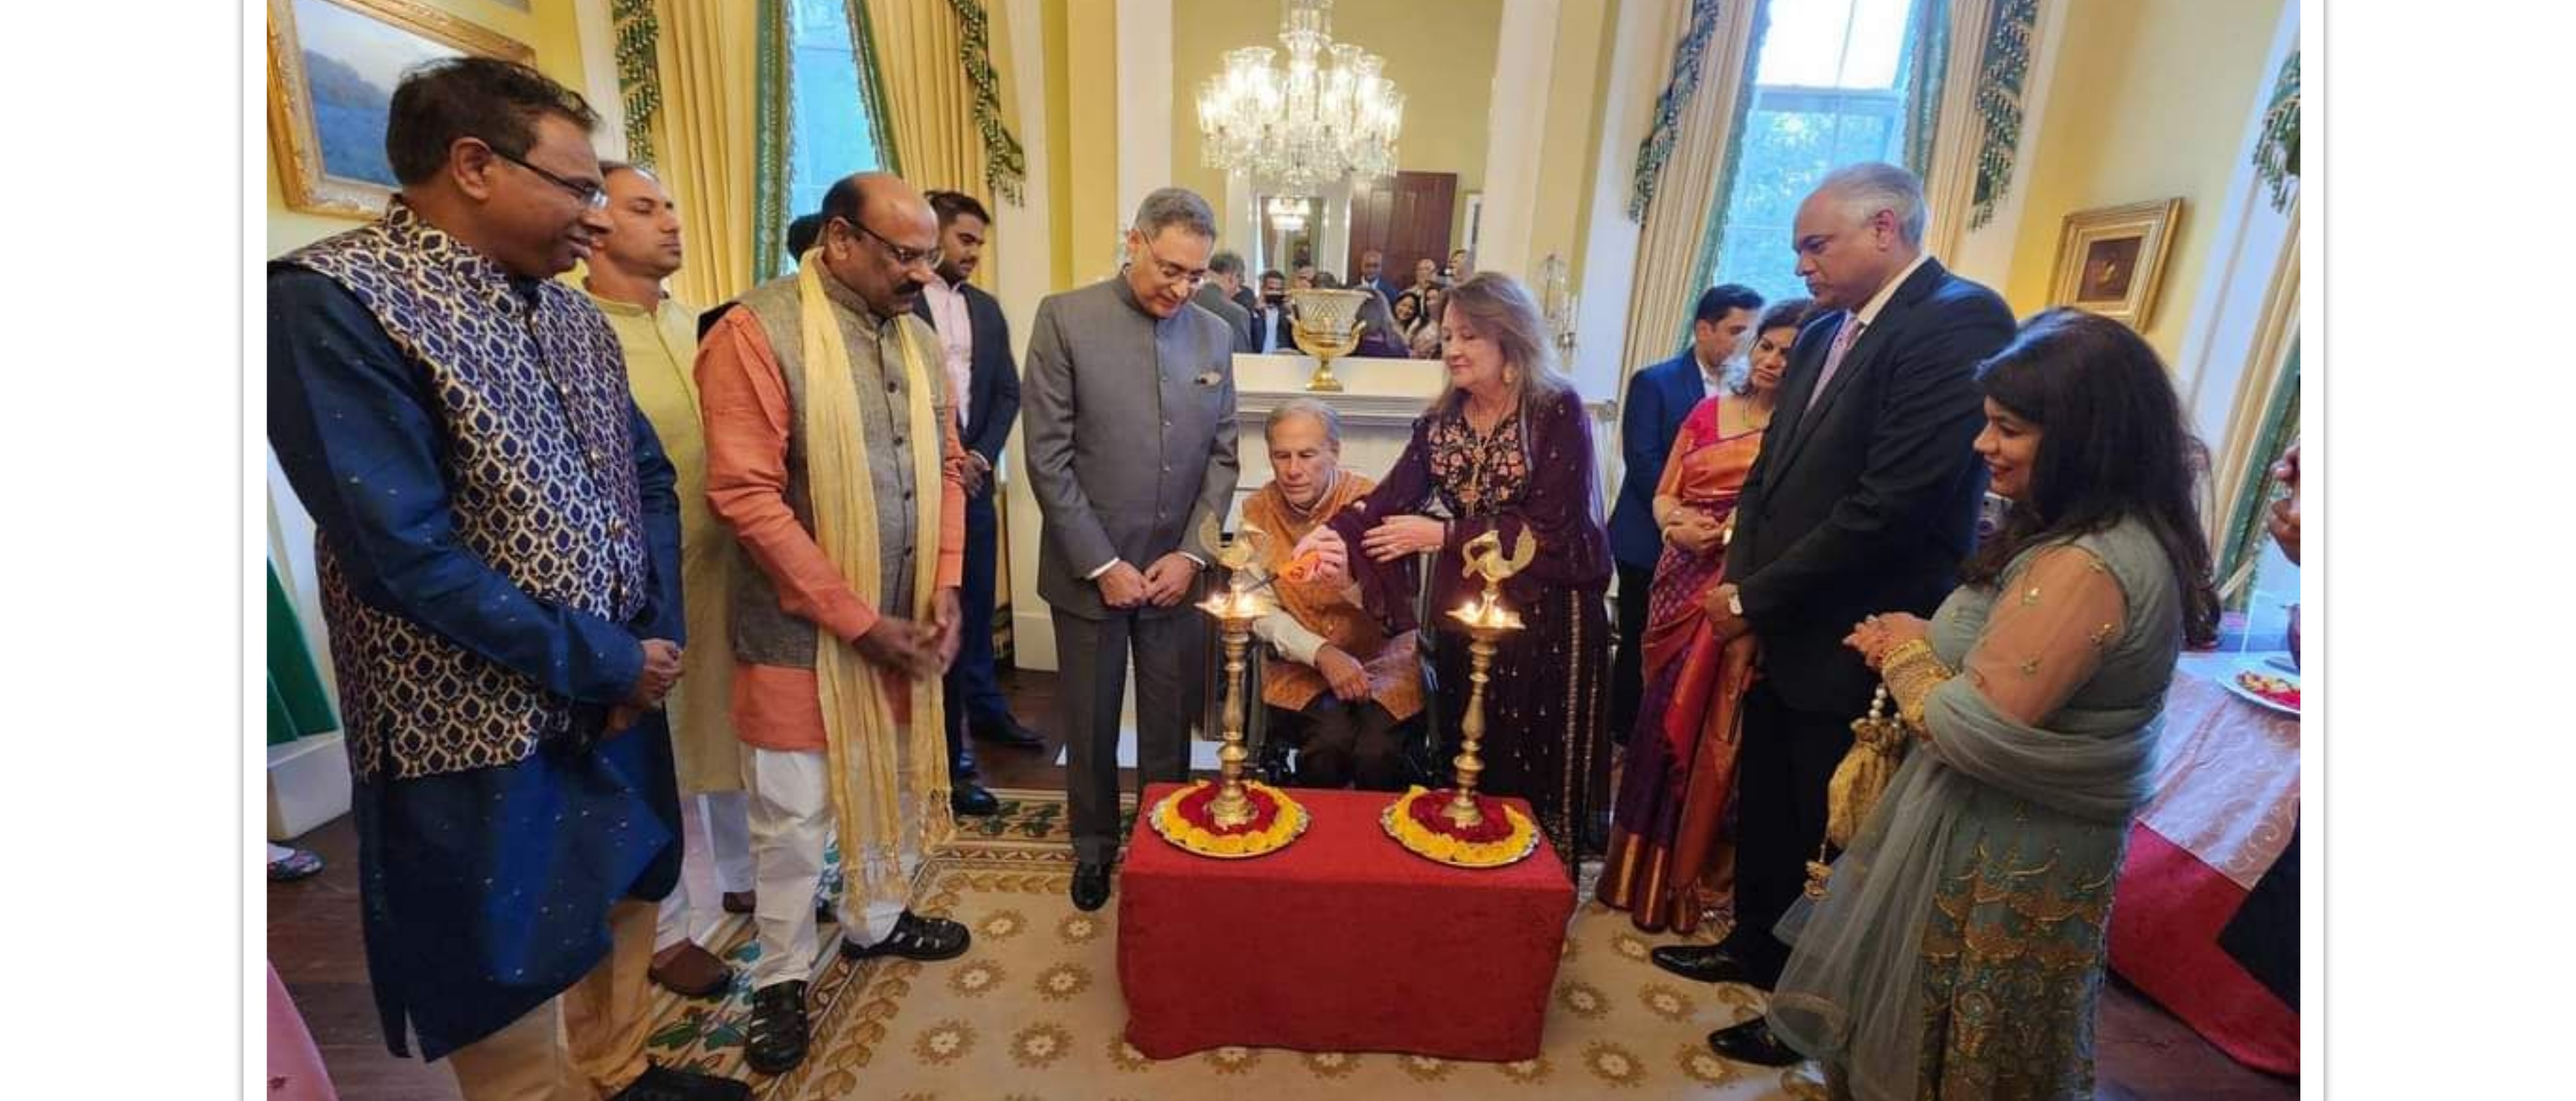  Consul General joined Governor of Texas Greg Abbott to celebrate Diwali  at the Governor’s Mansion, Austin on 23 October 2022